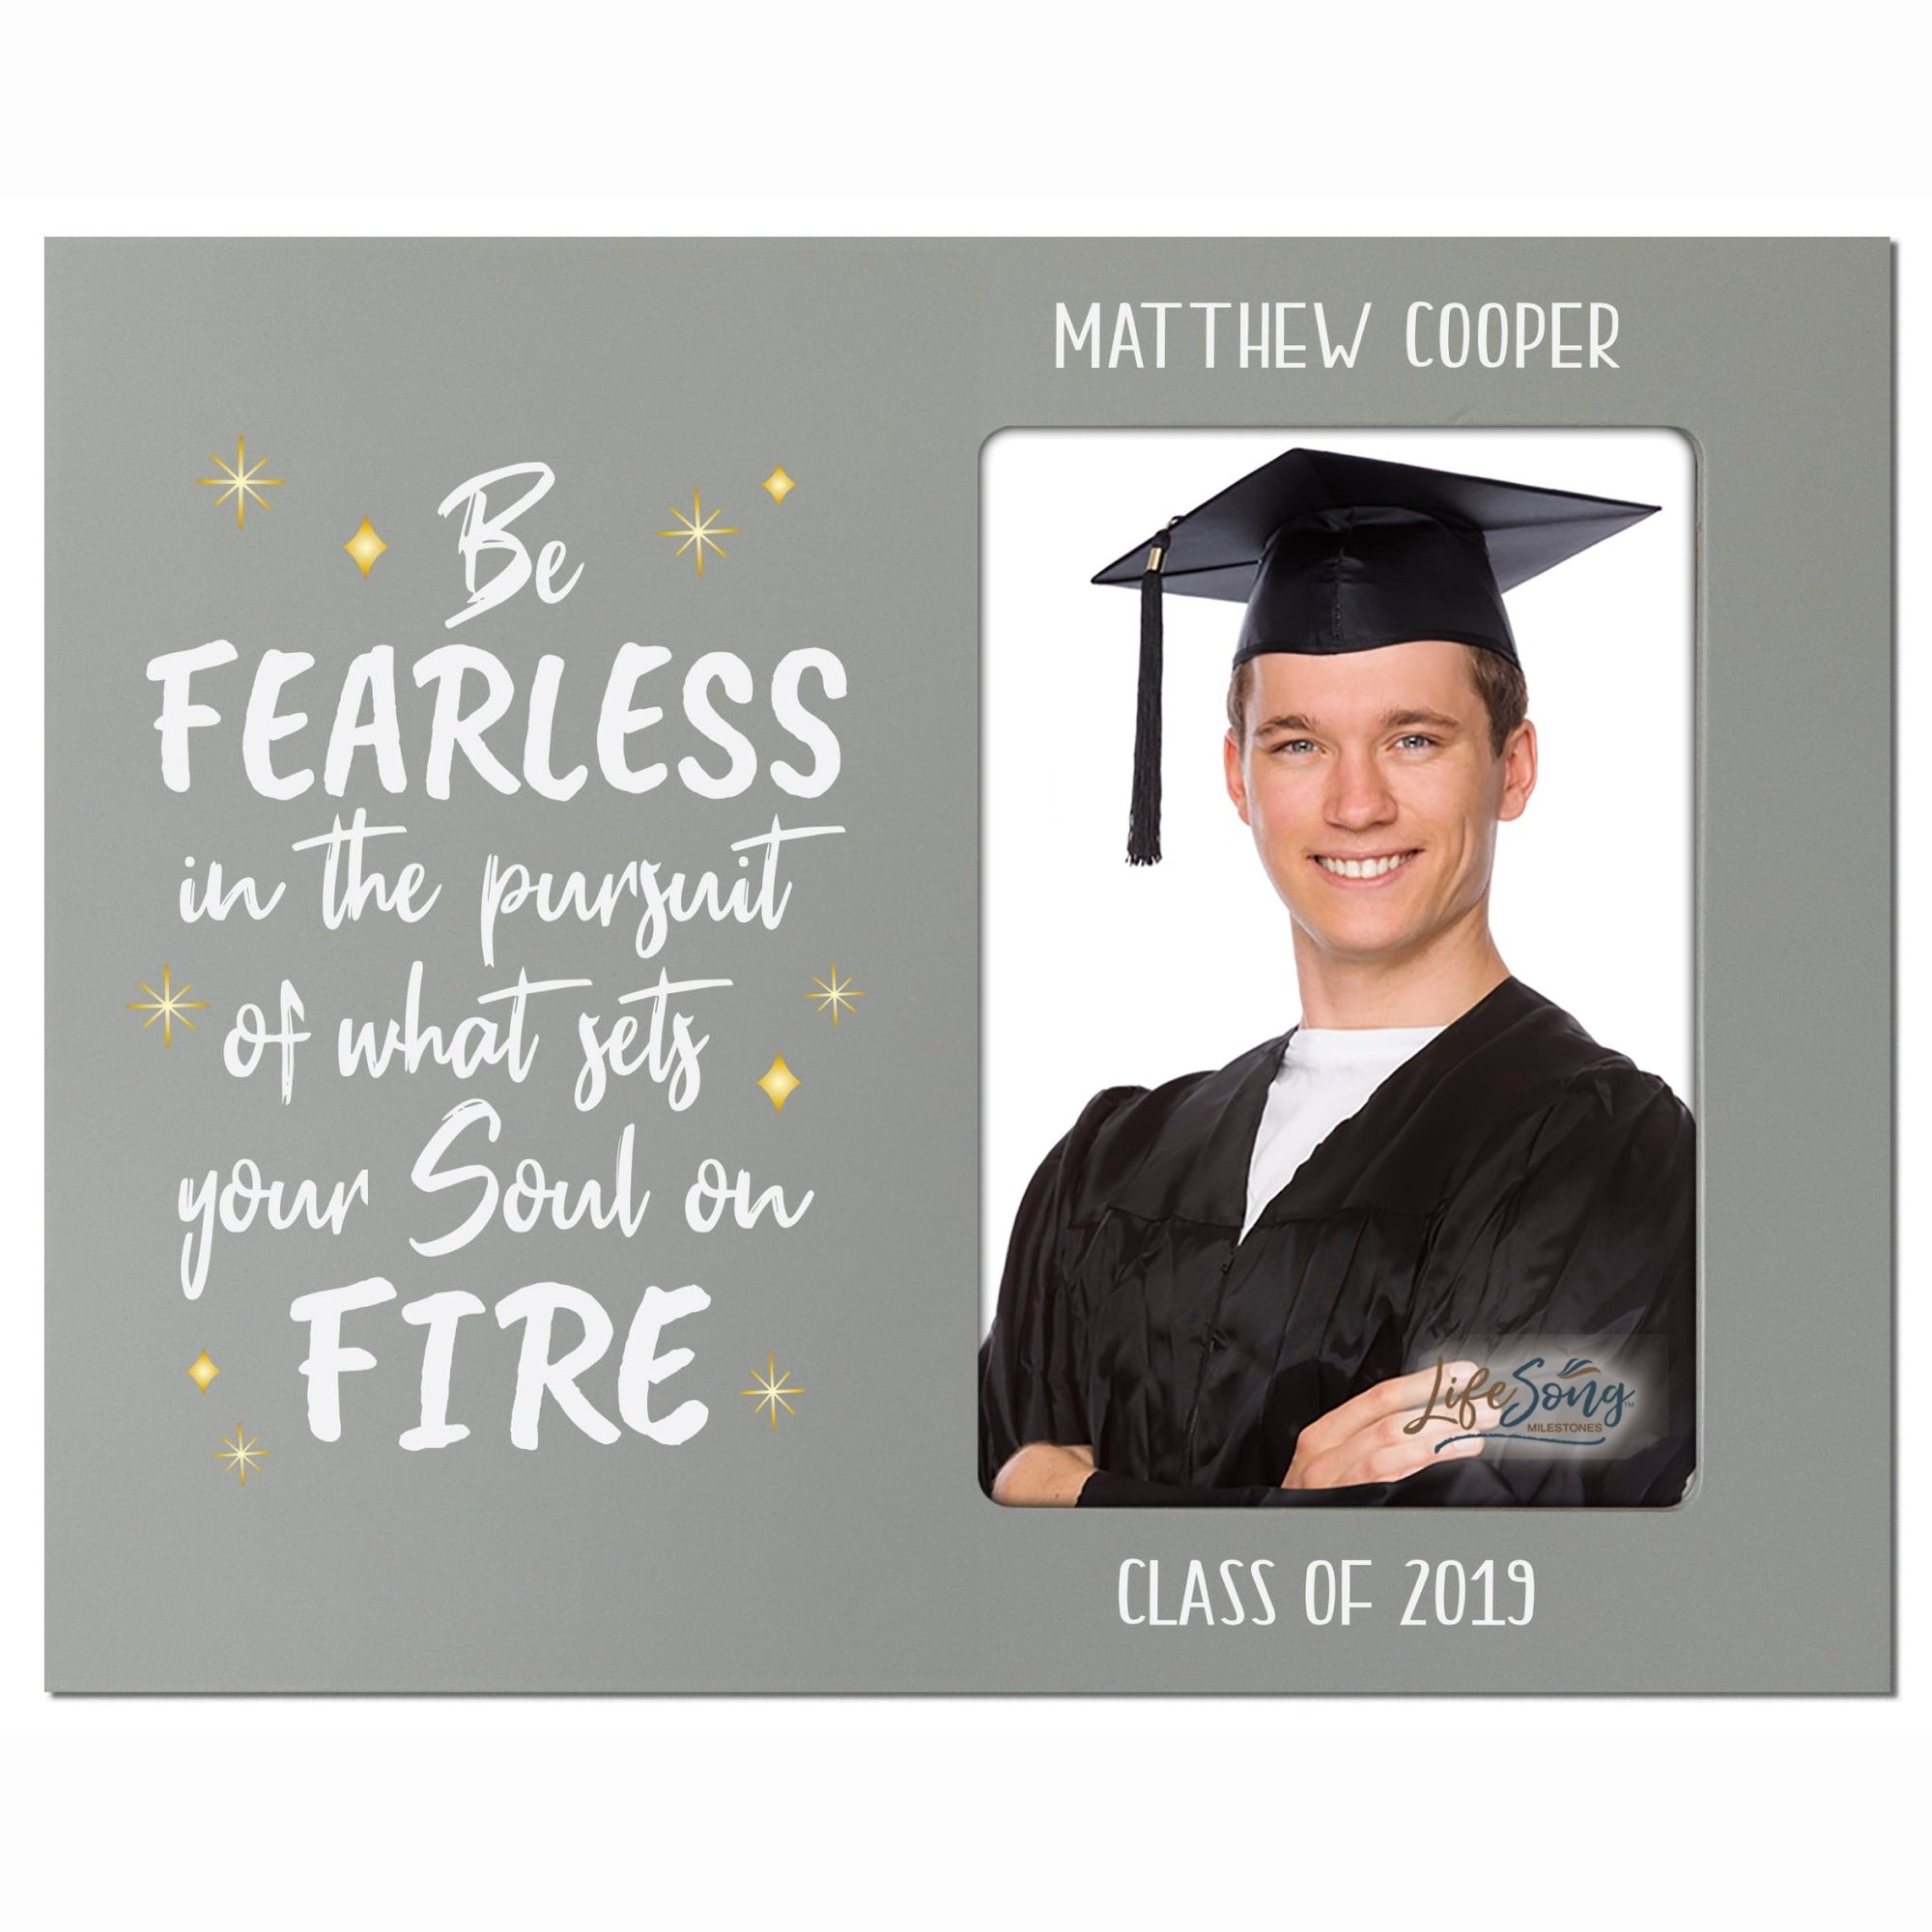 Personalized Graduation Photo Frame Gift - Be Fearless - LifeSong Milestones